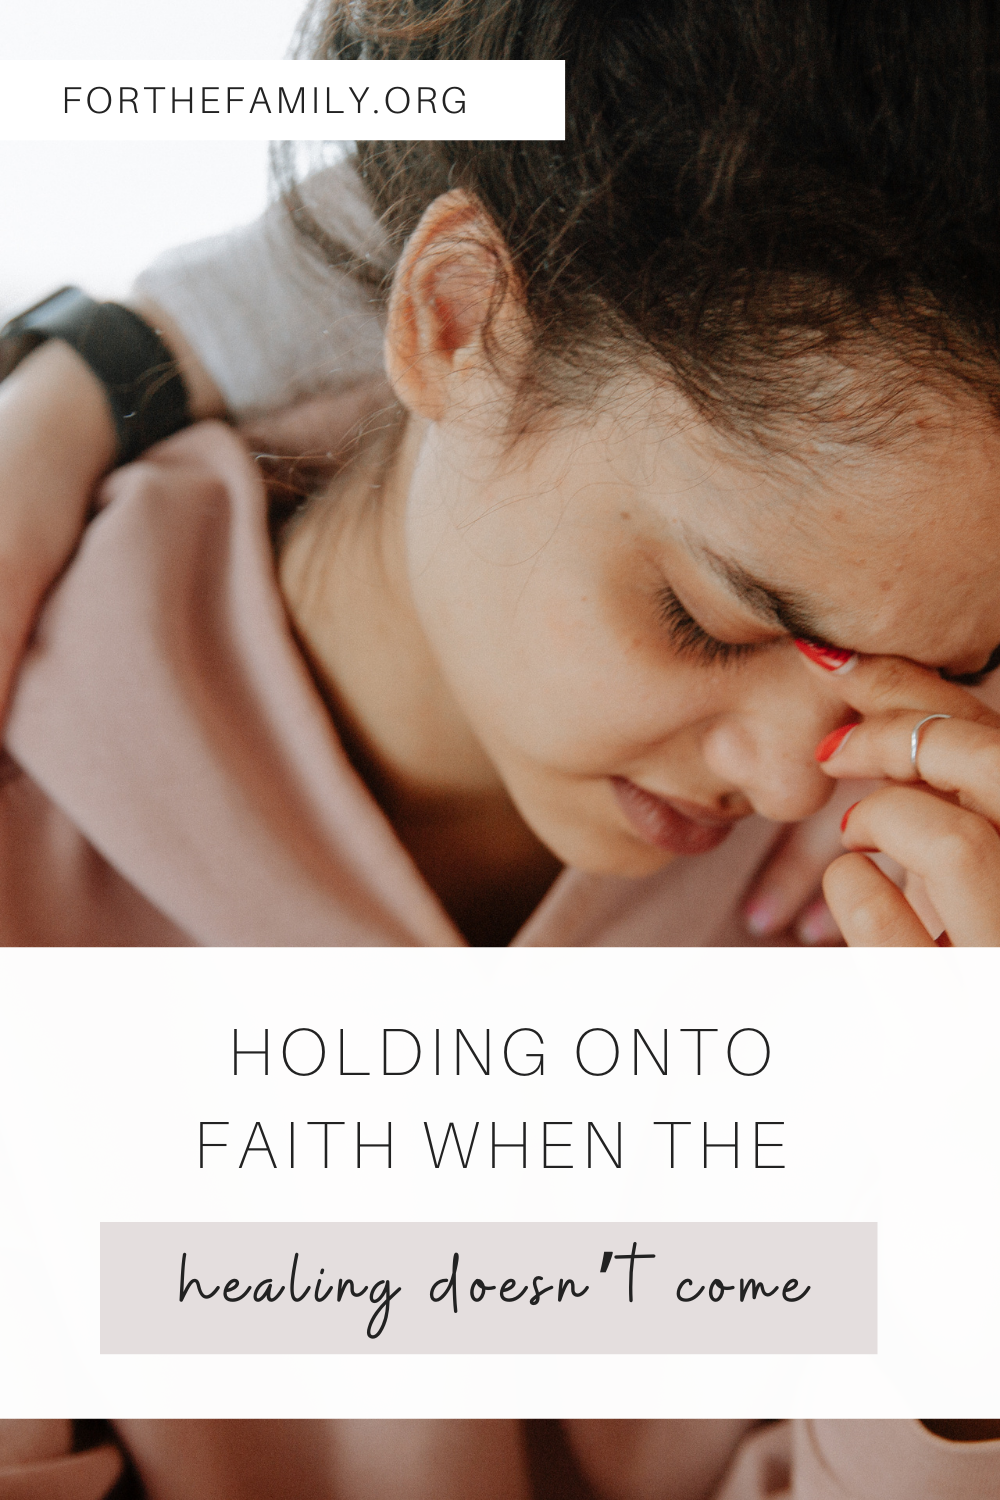 If you are hurting from an unimaginable loss, this is for you. It is difficult to reconcile pain, suffering, and sin with a good, loving, sovereign God. But I want to encourage your heart to hold onto faith, even when the healing doesn’t come.